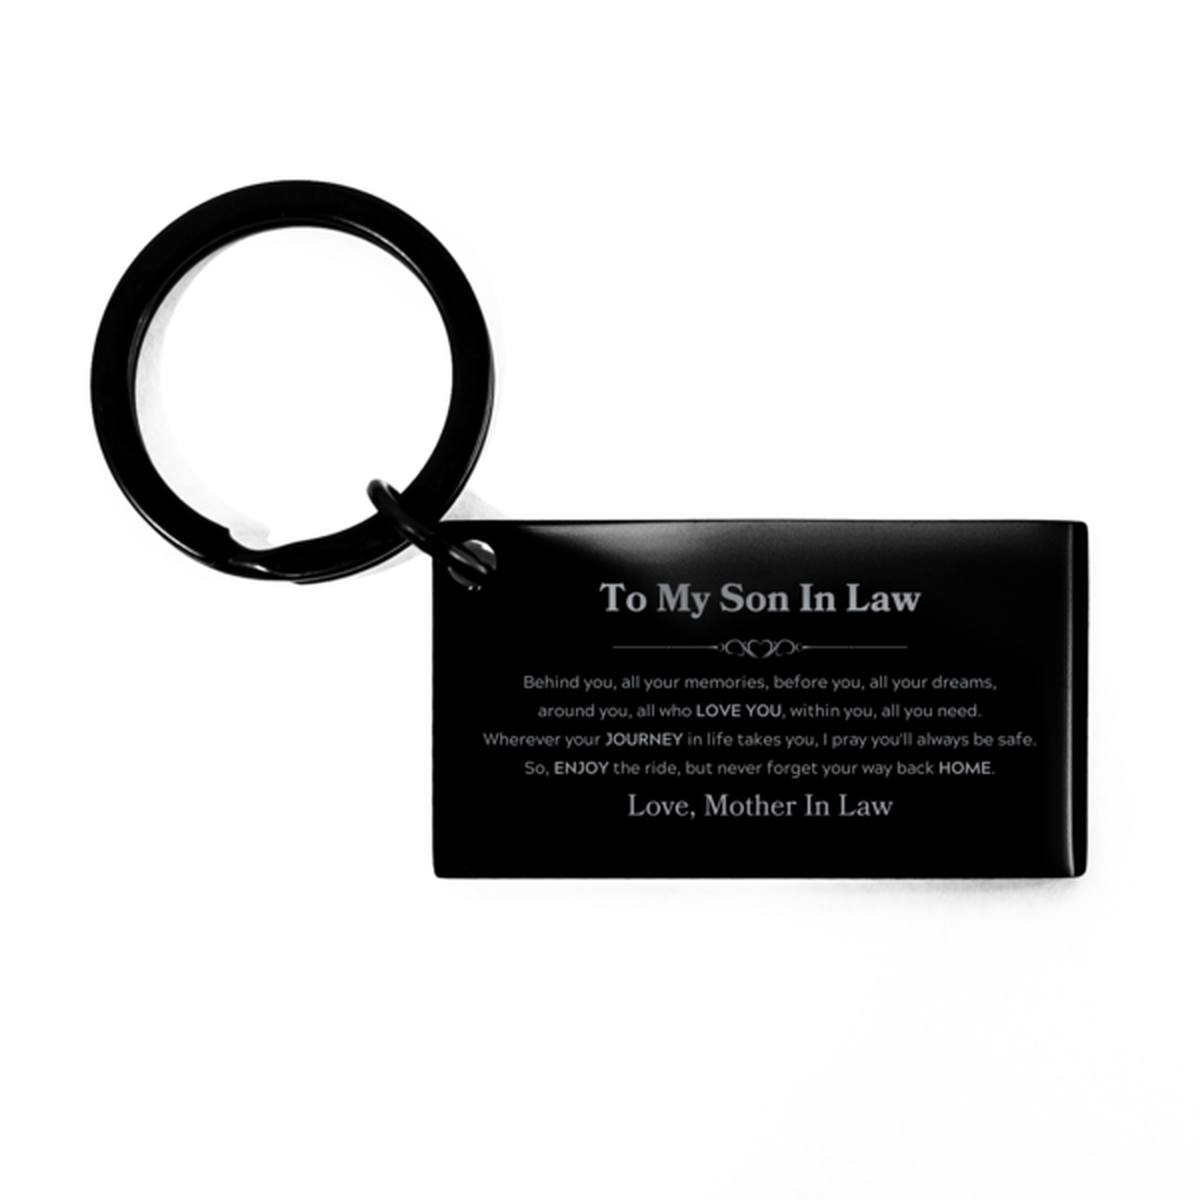 To My Son In Law Graduation Gifts from Mother In Law, Son In Law Keychain Christmas Birthday Gifts for Son In Law Behind you, all your memories, before you, all your dreams. Love, Mother In Law